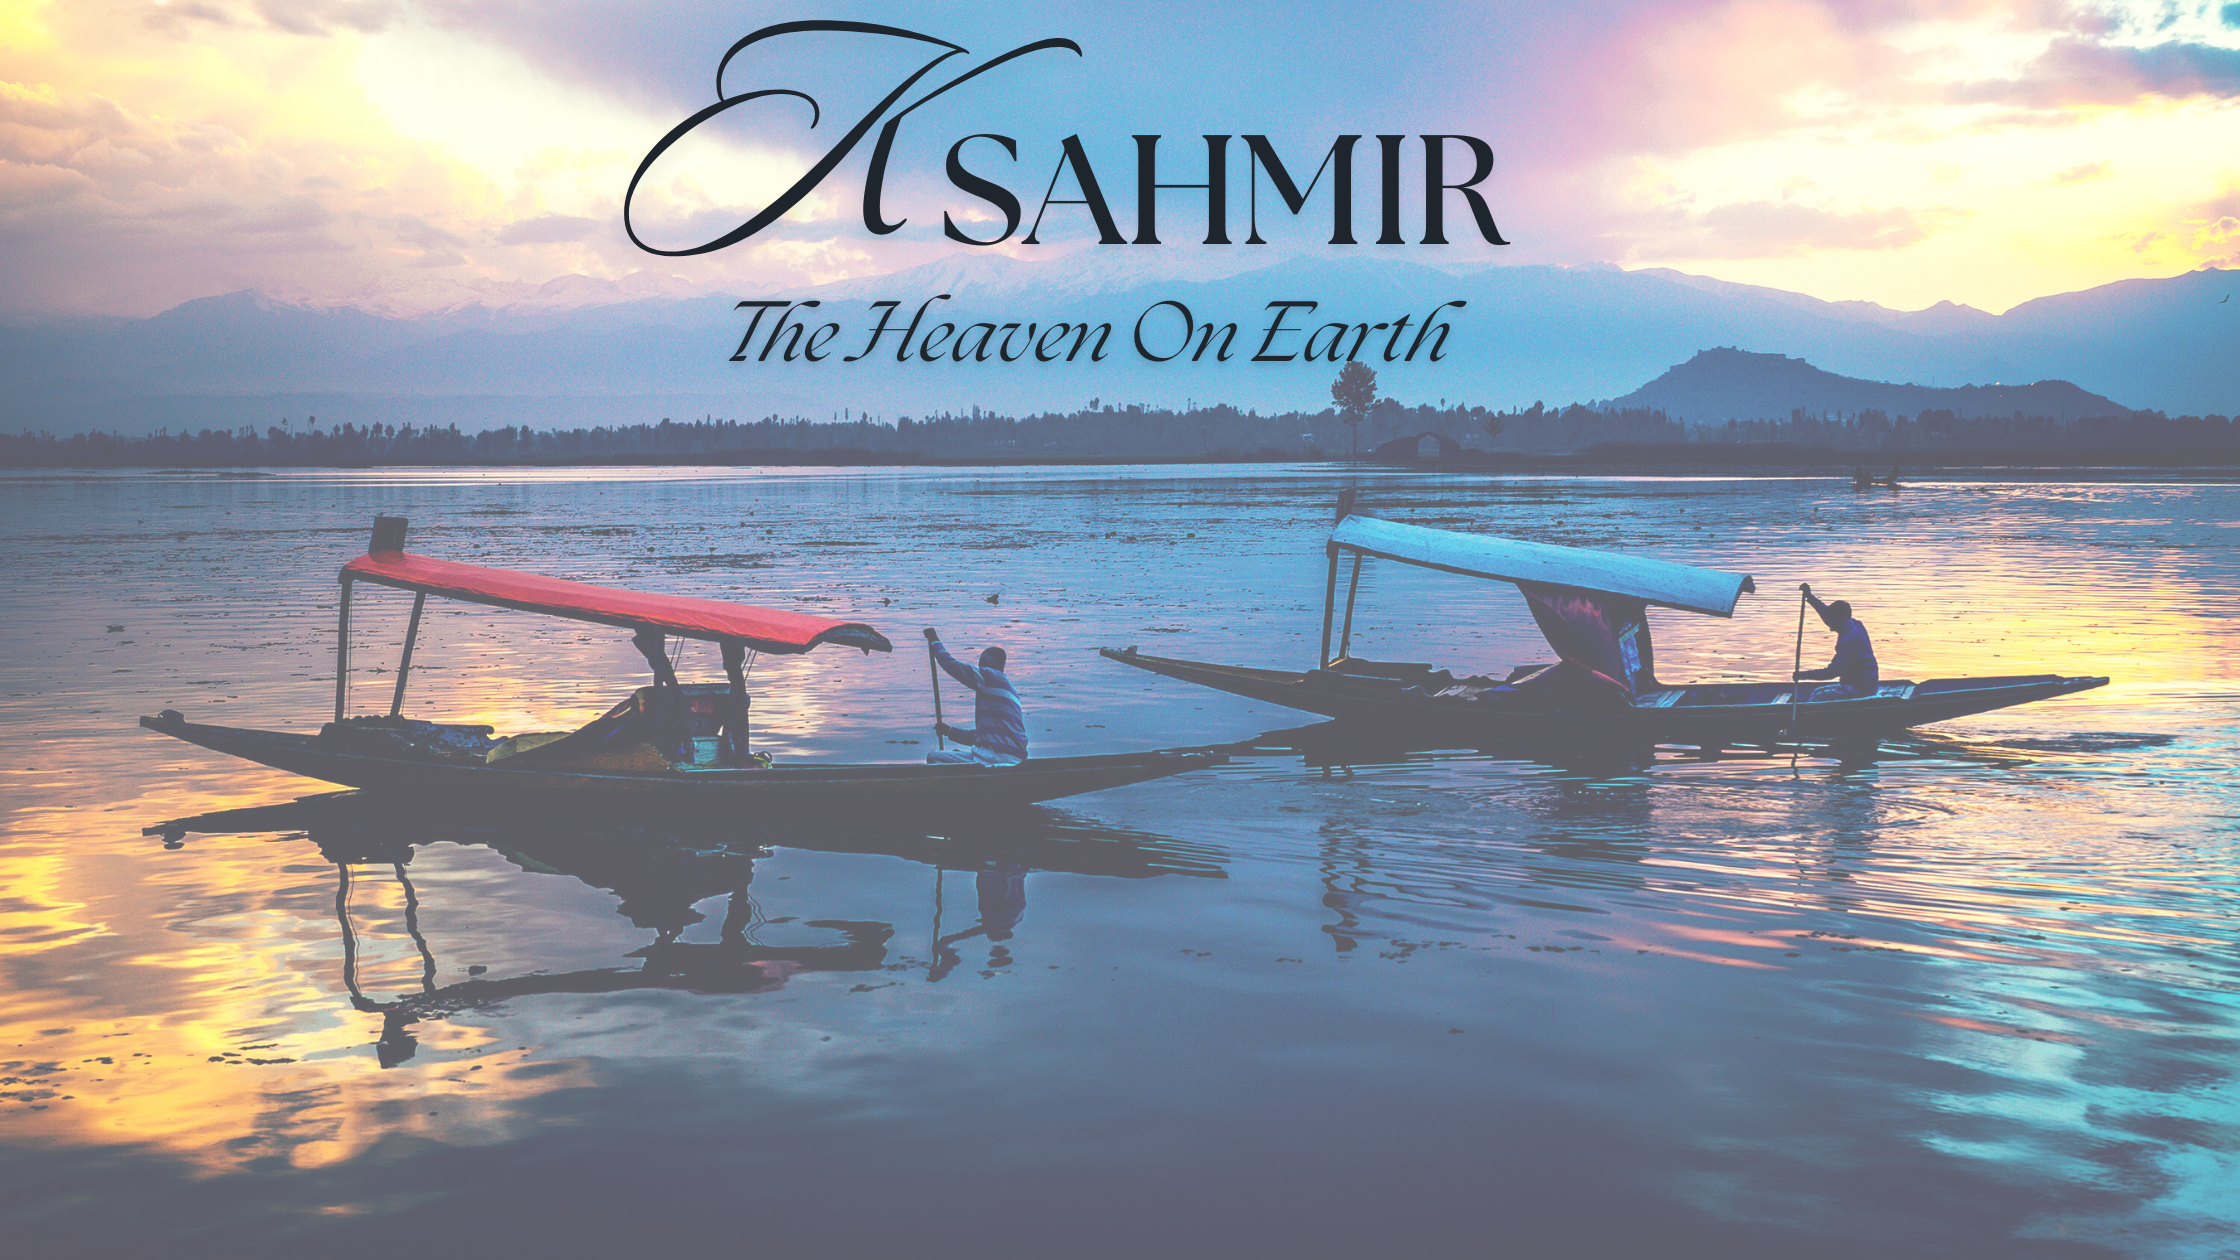 Revealing India’s Iconic Jewel in Kashmir: A Detailed Travel Guide